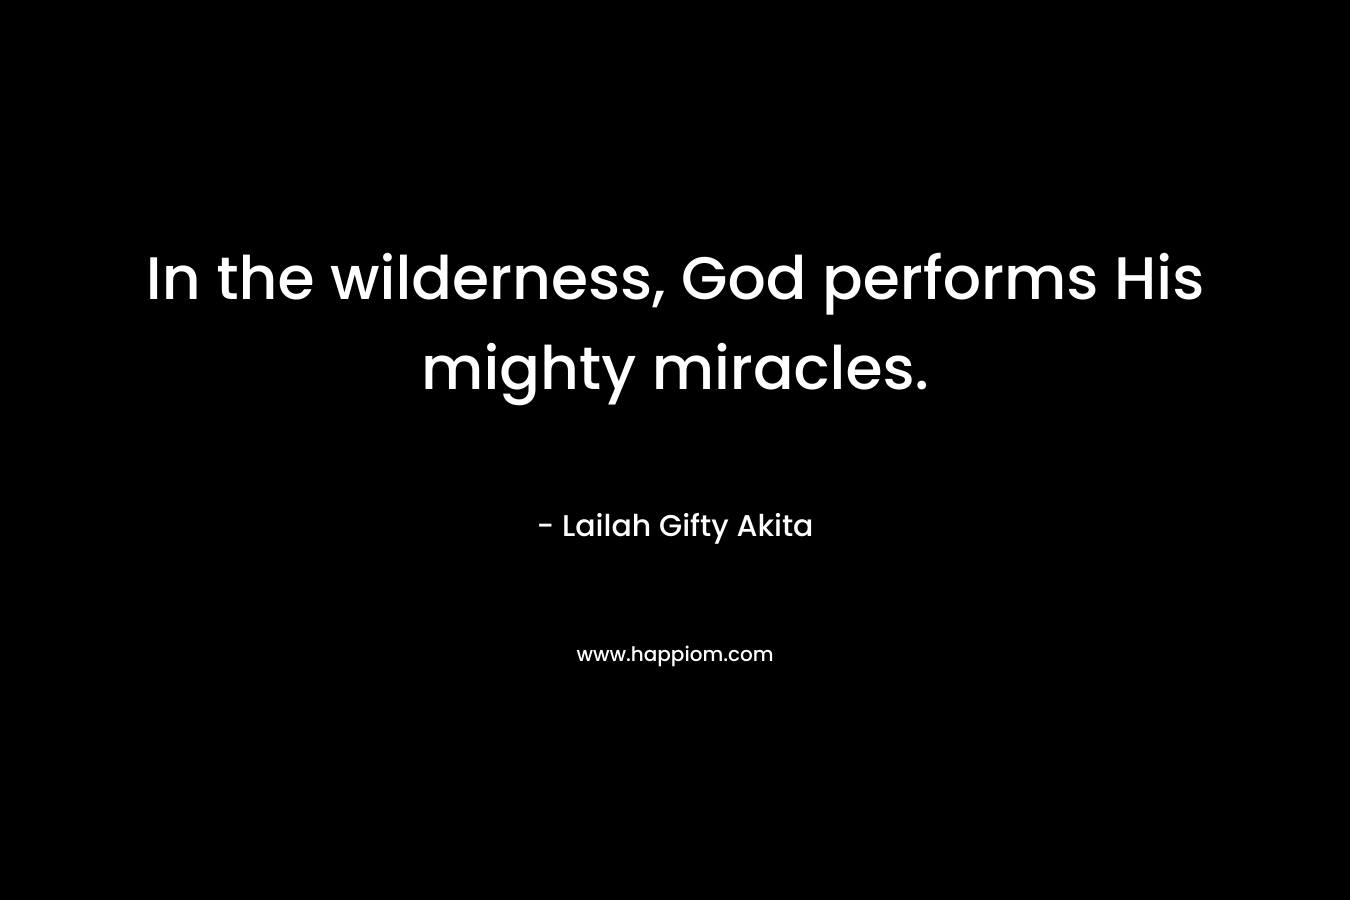 In the wilderness, God performs His mighty miracles.